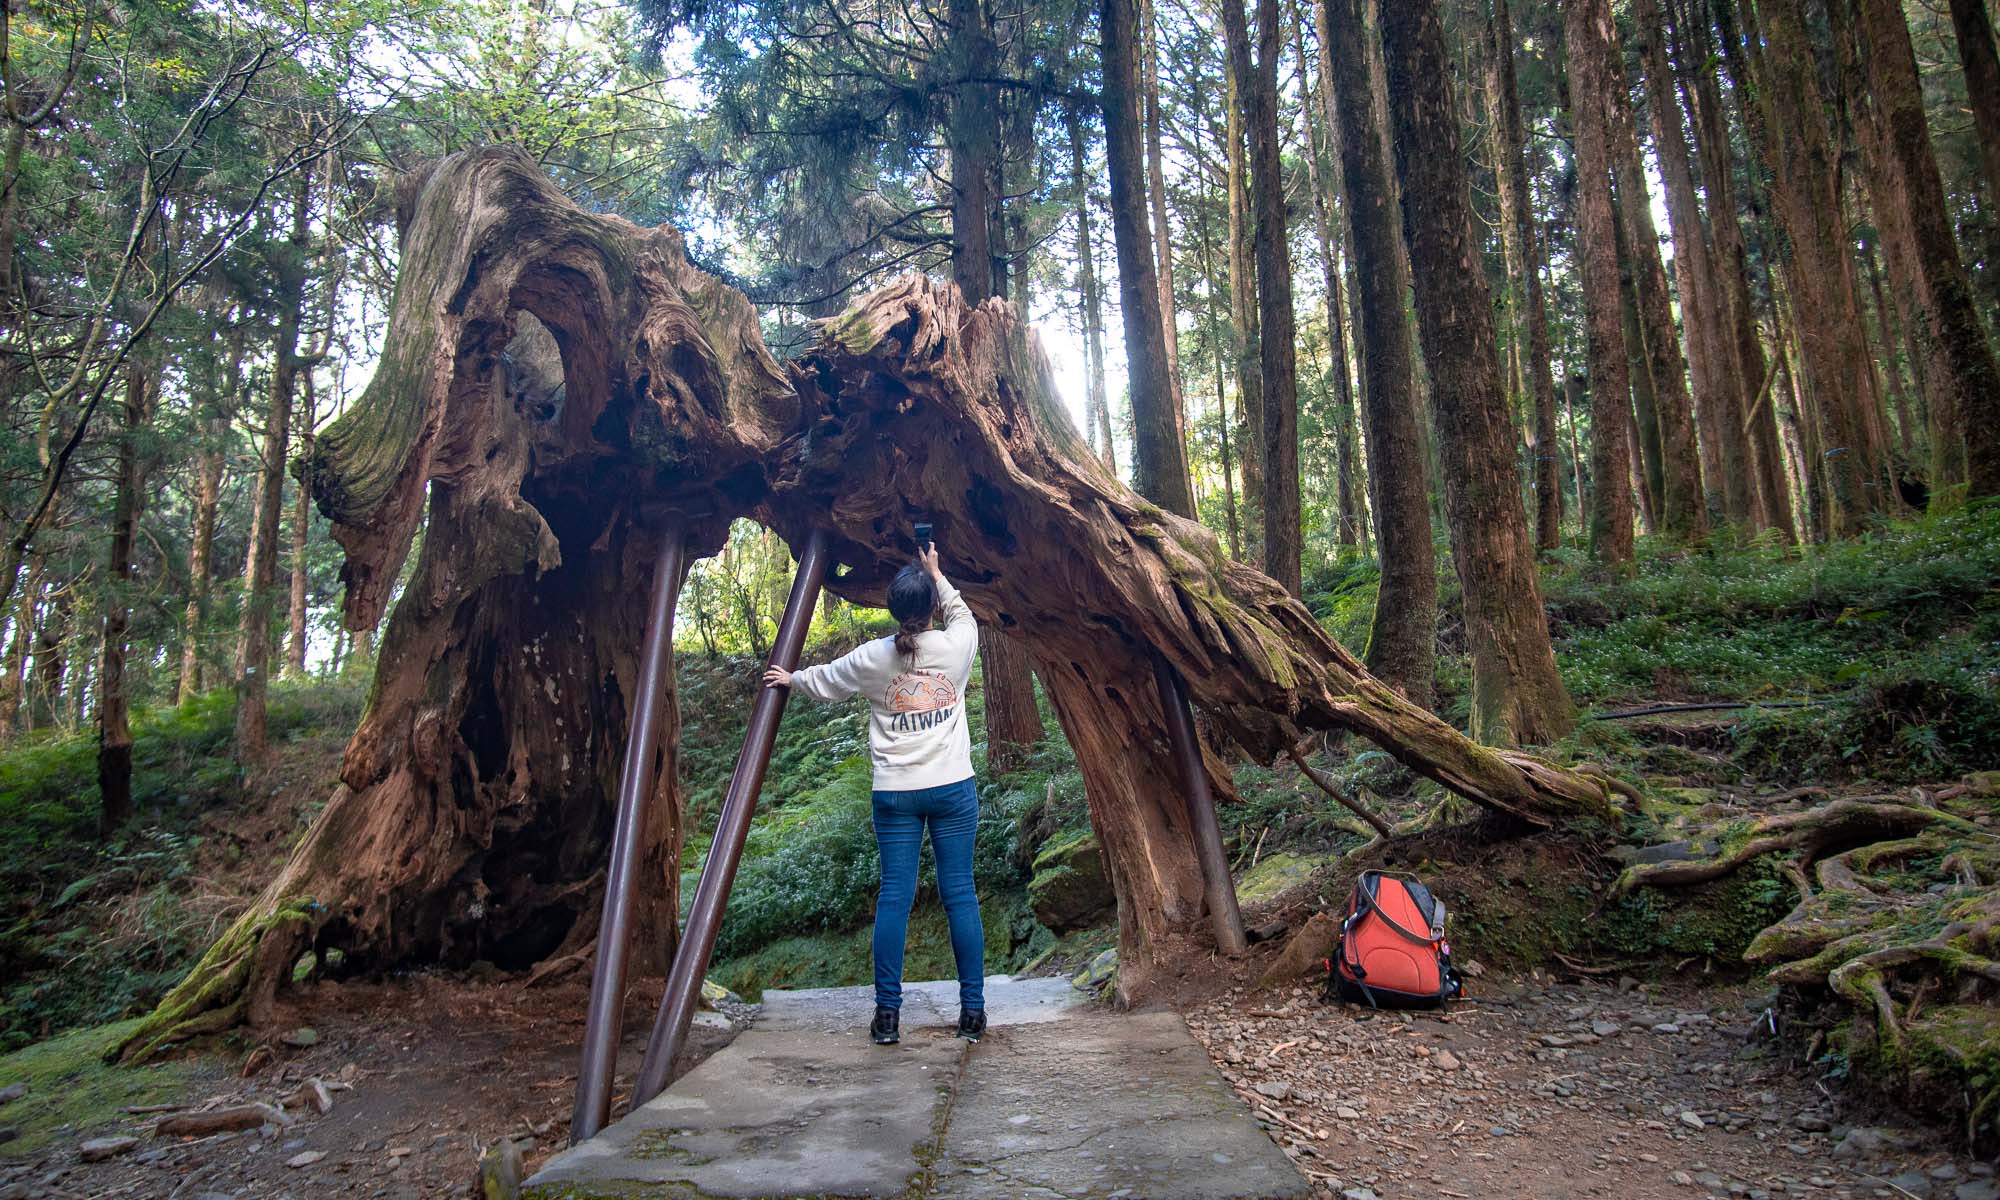 Alishan's easy to access hiking trails wind through thousand-year-old tree groves.